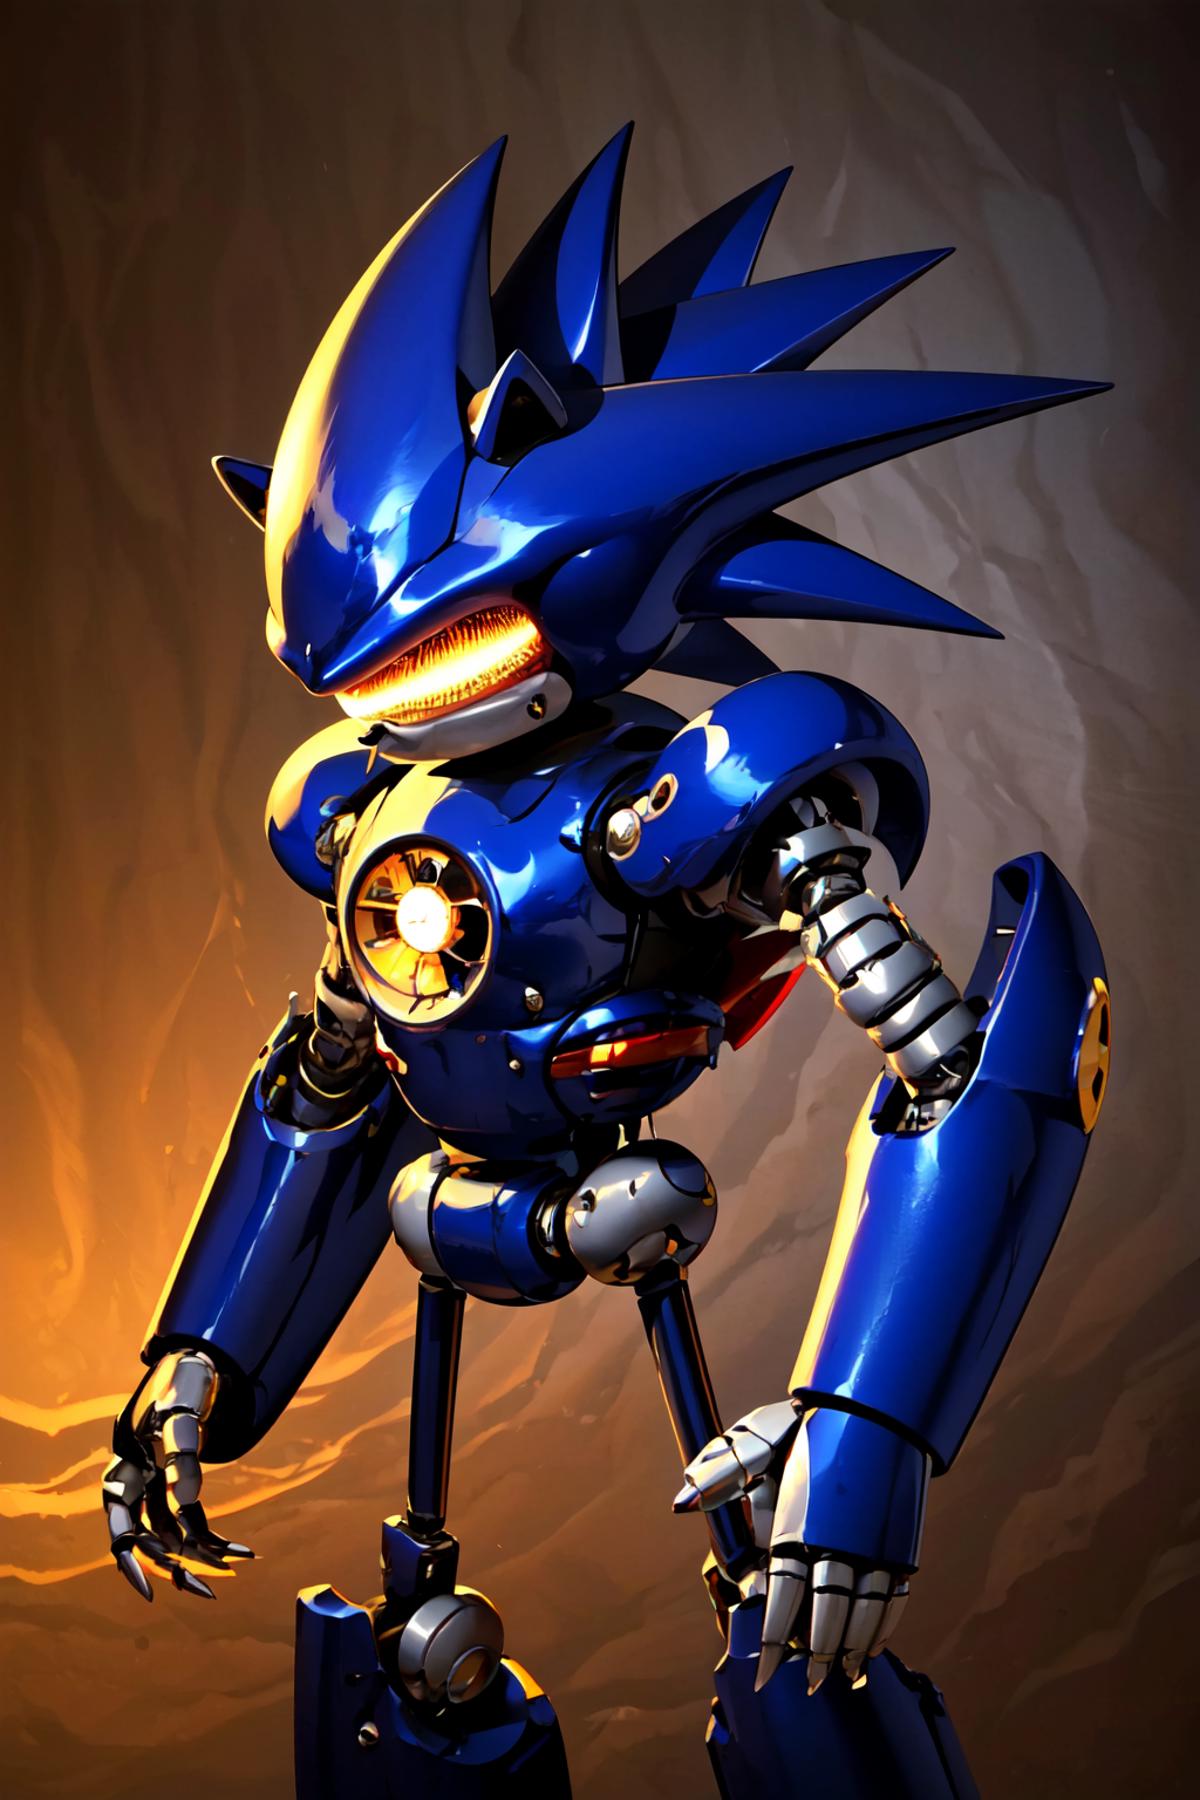 Sonic | 6 different Sonic's [Base Sonic, Mecha, Metal, Super Sonic, Sonic.exe, Sanic] image by FallenIncursio